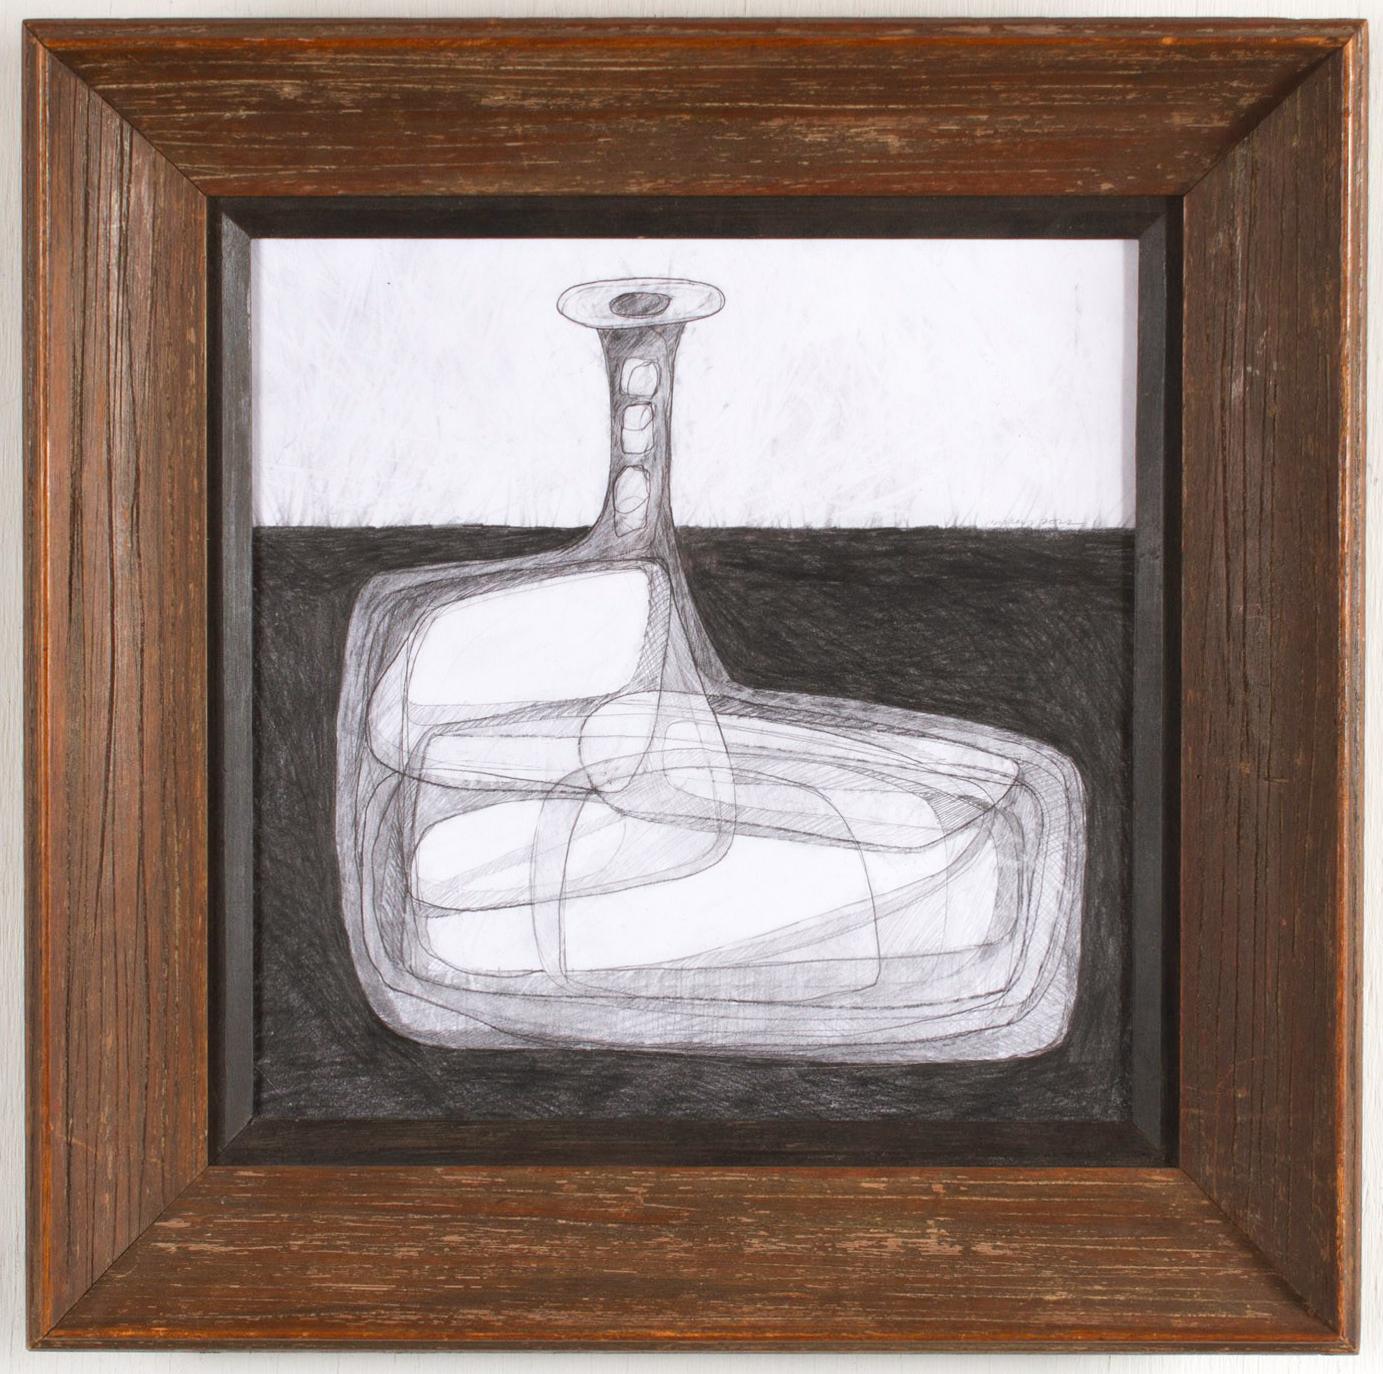 David Dew Bruner Abstract Drawing - Single Bottle V: Abstract Cubist Style Morandi Bottle Still Life Pencil Drawing